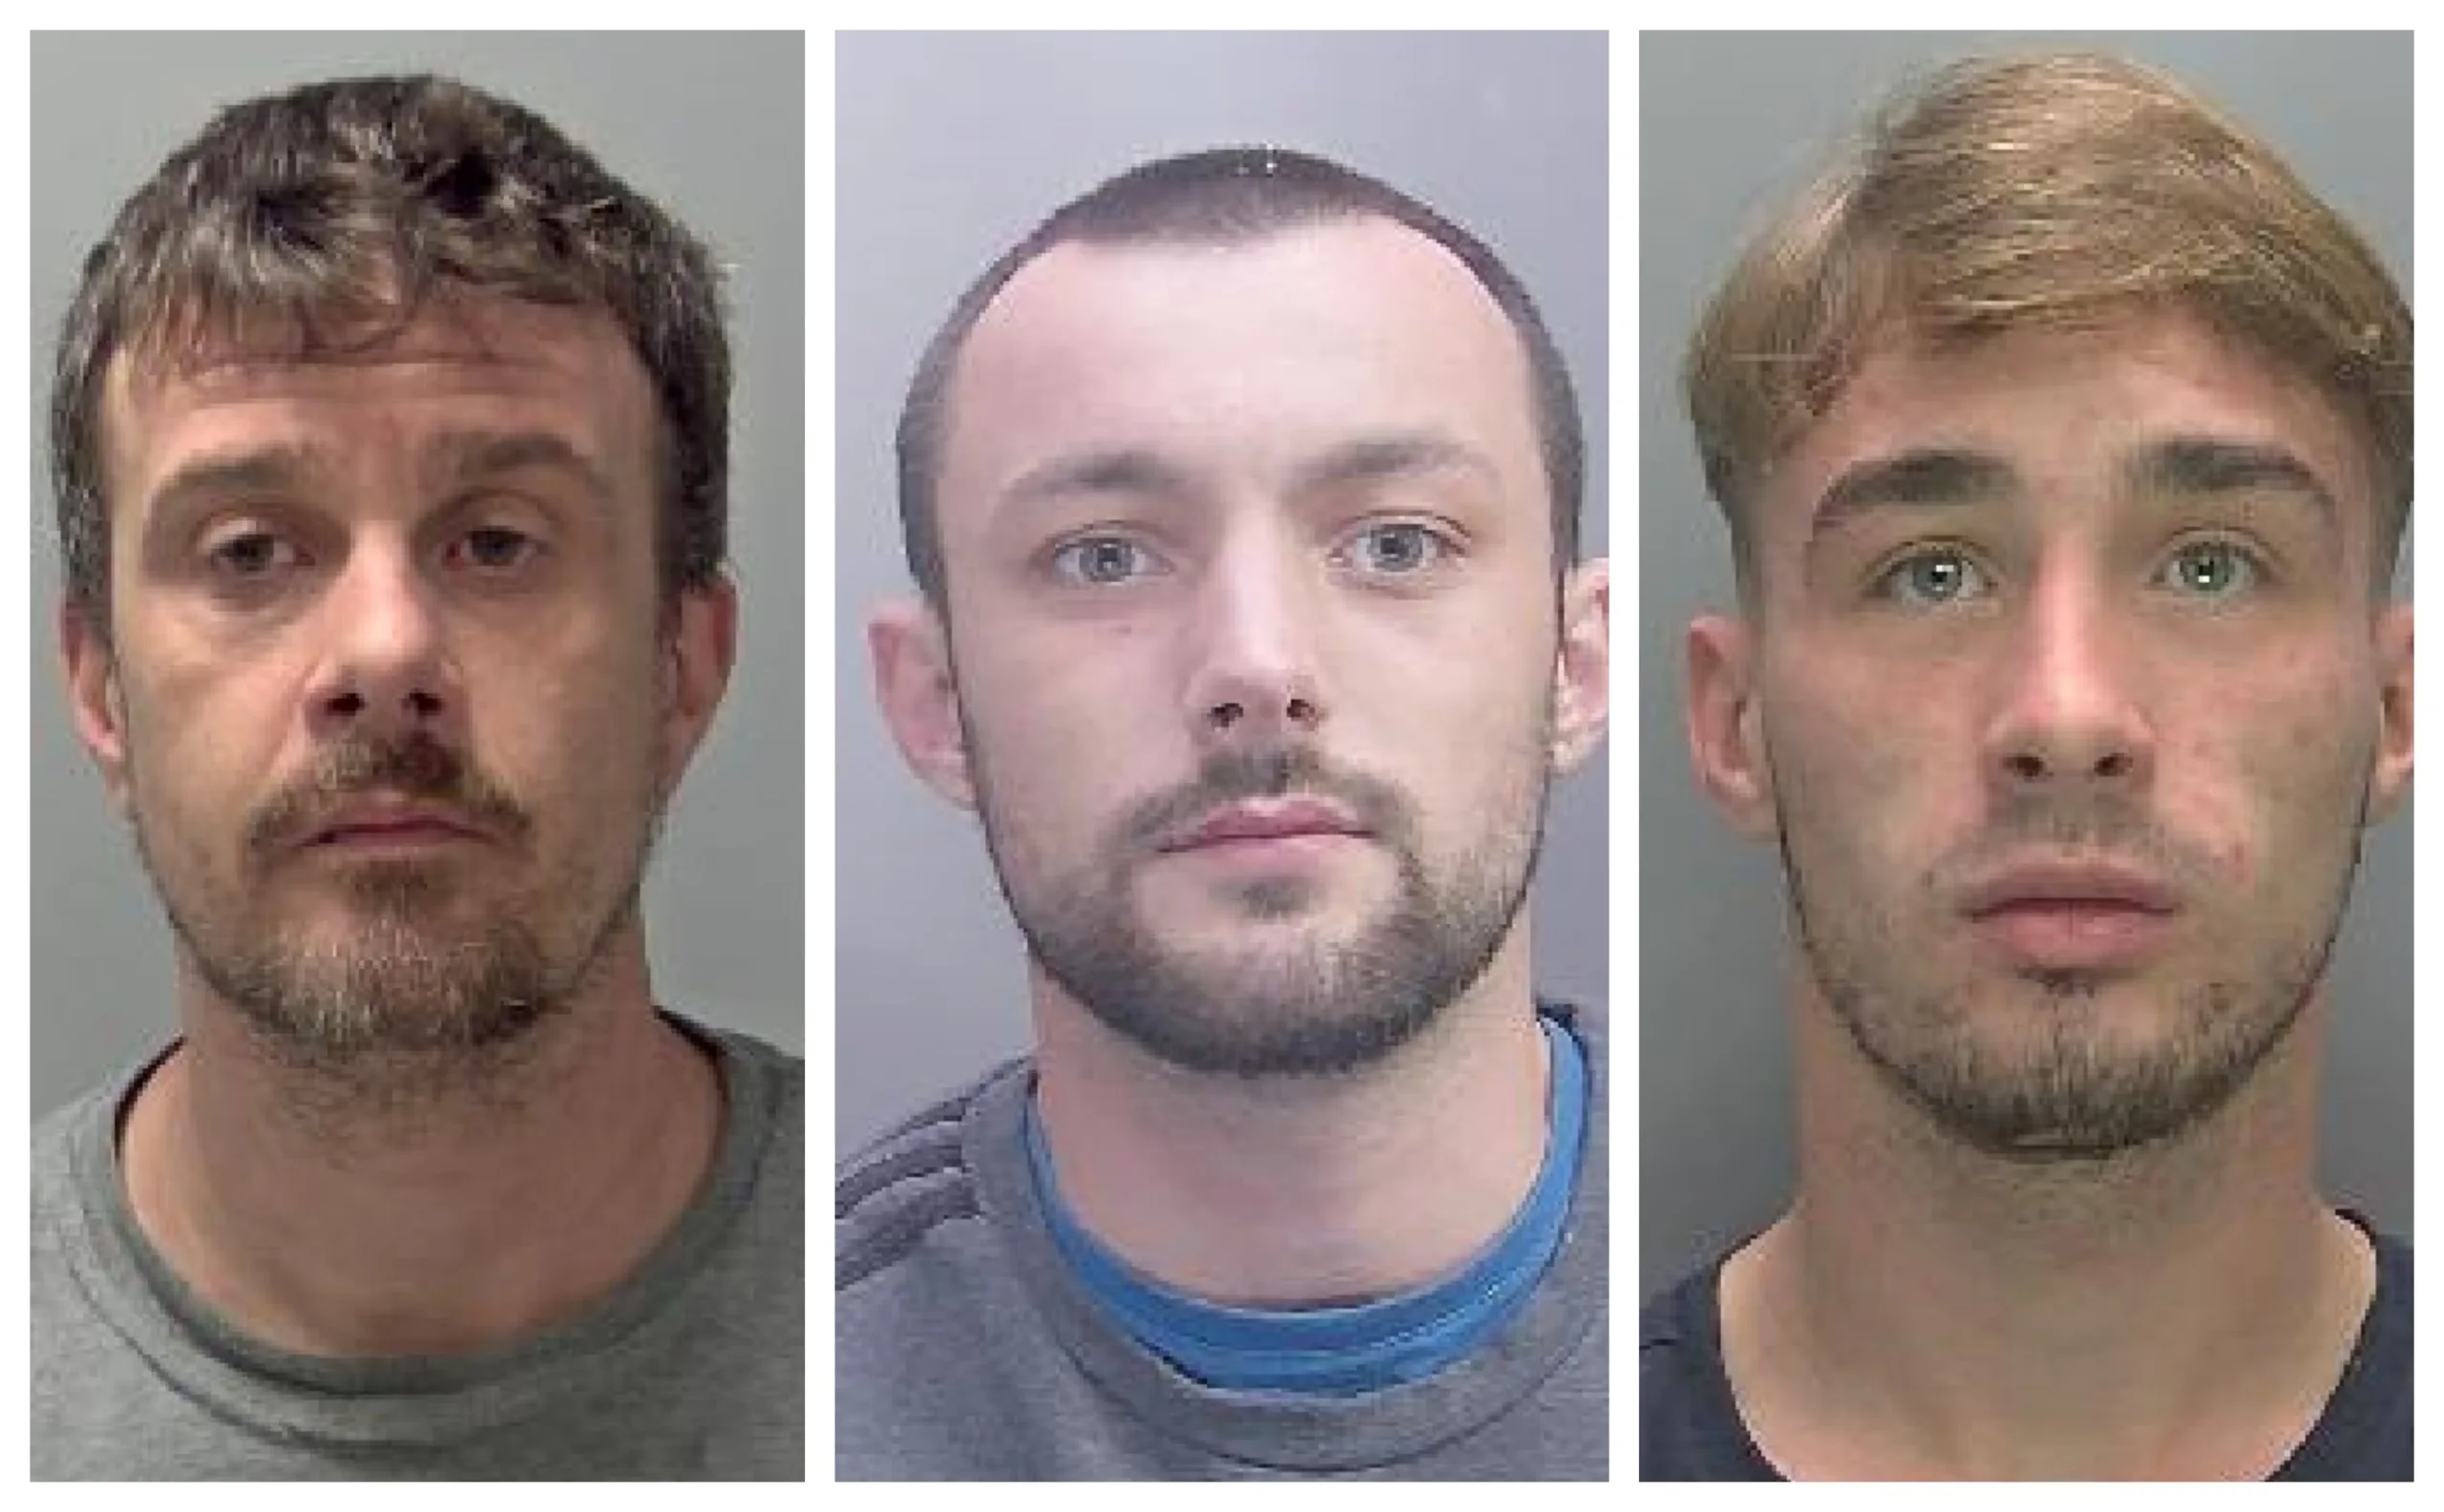 Three jailed for street fight in Cambridge that happened four years ago: From left: Gordon Lee Gulliford, Jimmy Willett, and Tommy Lee Gulliford